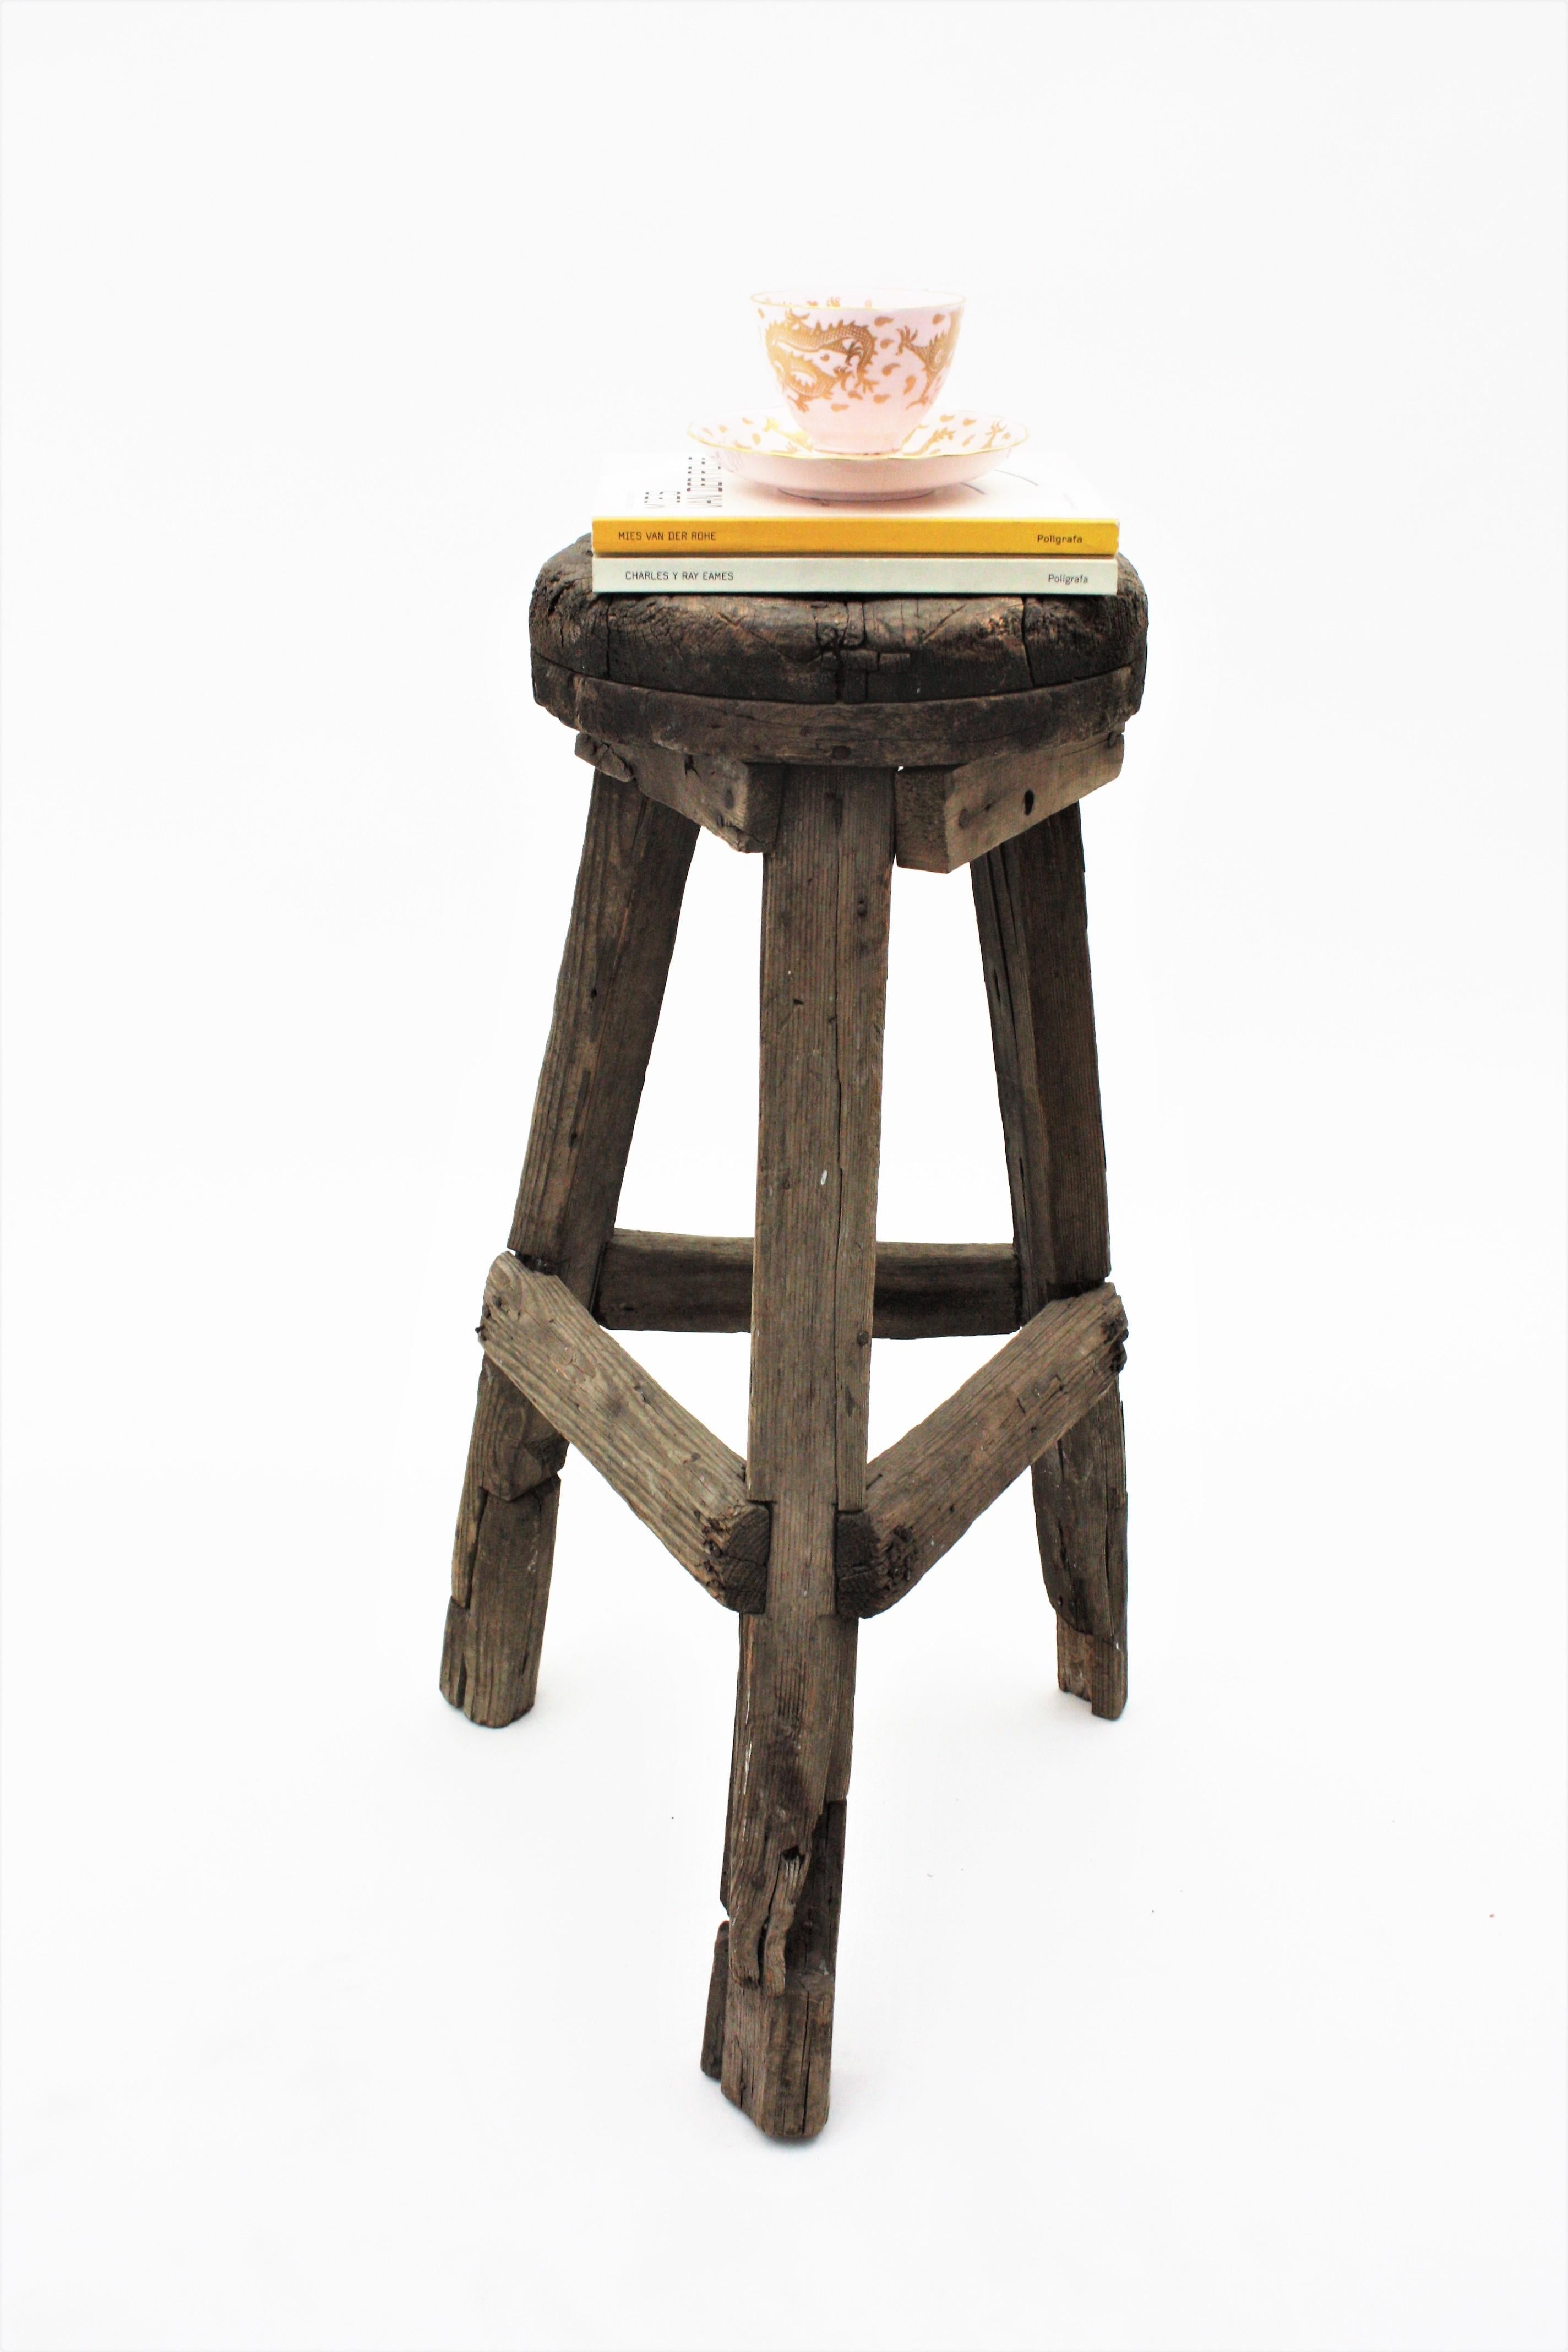 Hand-Crafted Spanish Rustic Folk Wooden Tripod Stool / Side Table For Sale